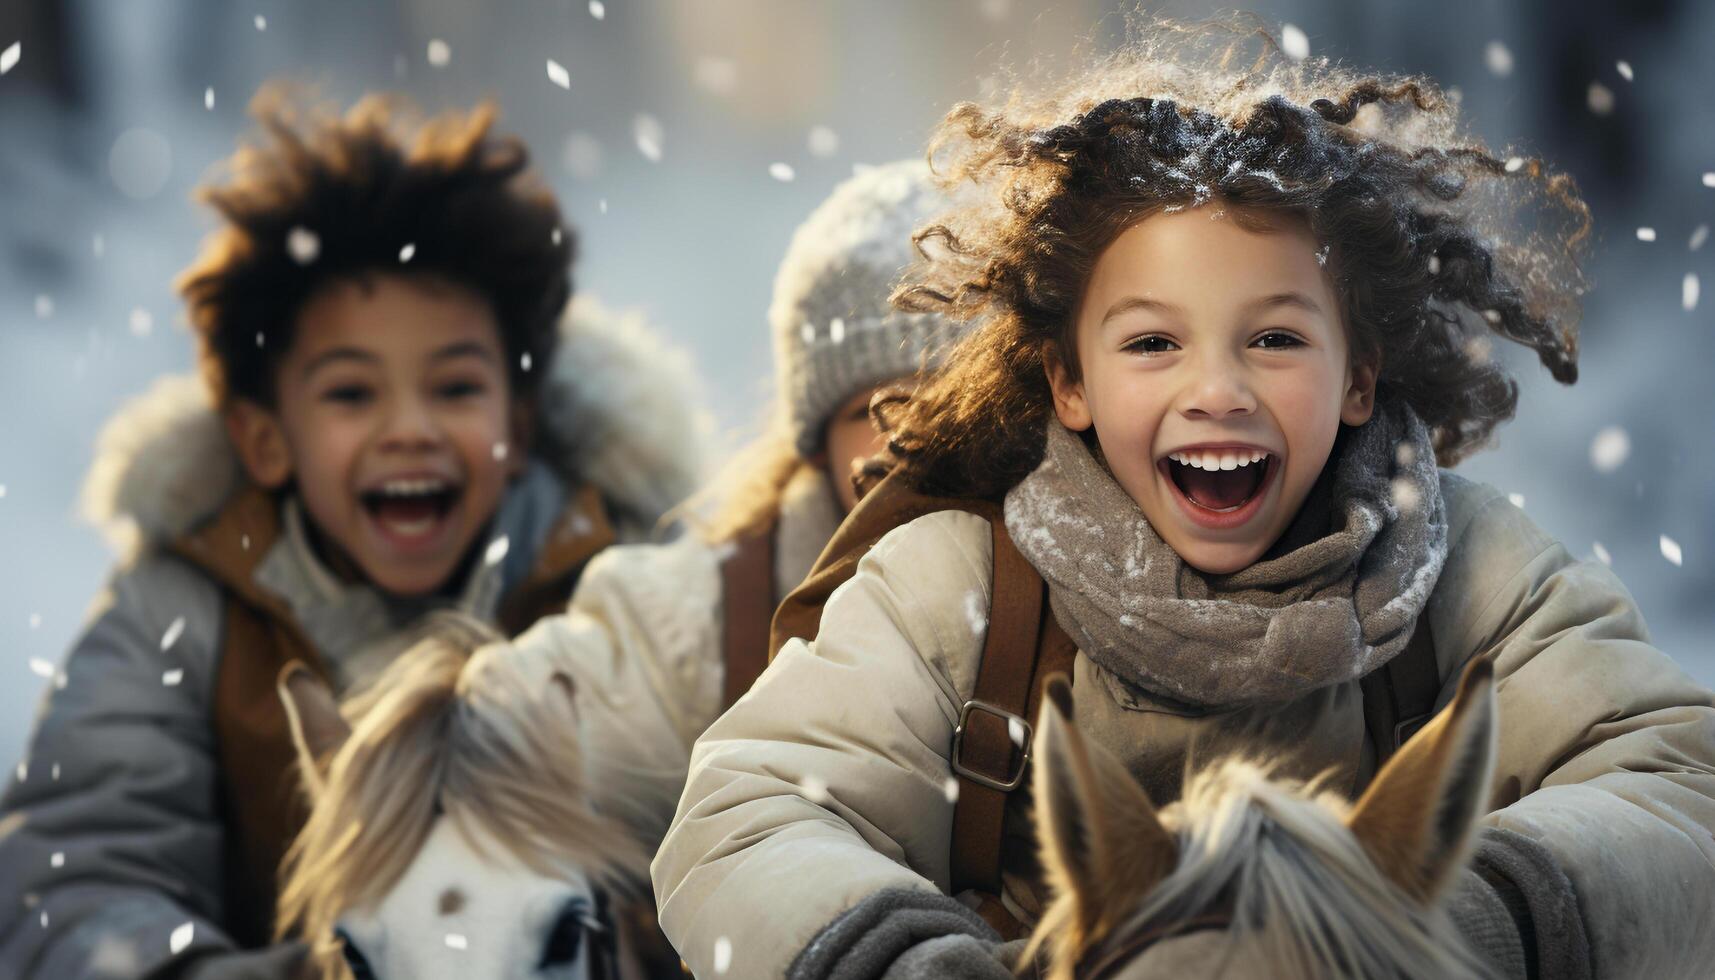 AI generated Smiling children playing in the snow, enjoying winter outdoors generated by AI photo